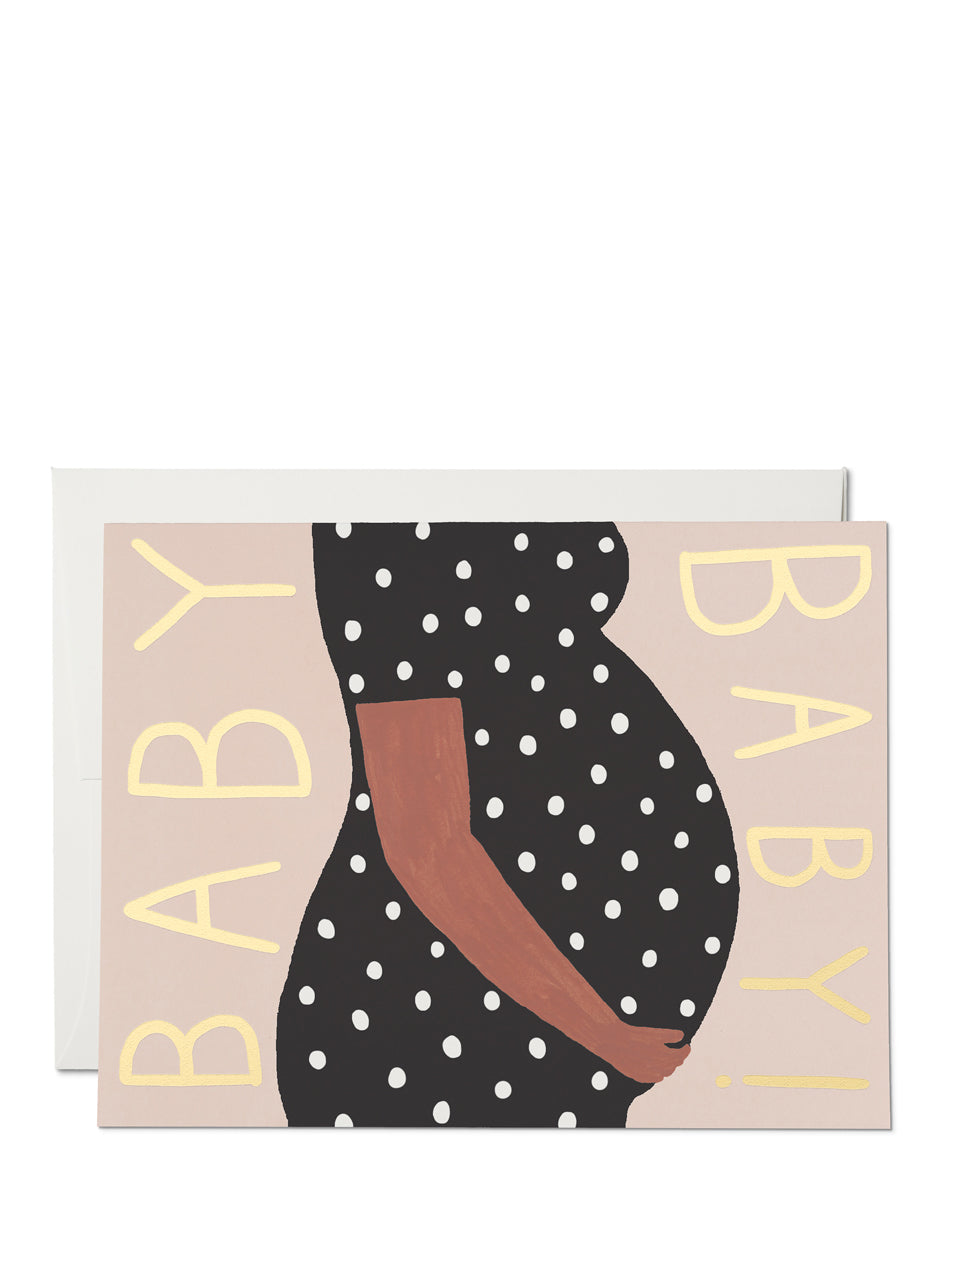 BABY BABY! – New Baby Card